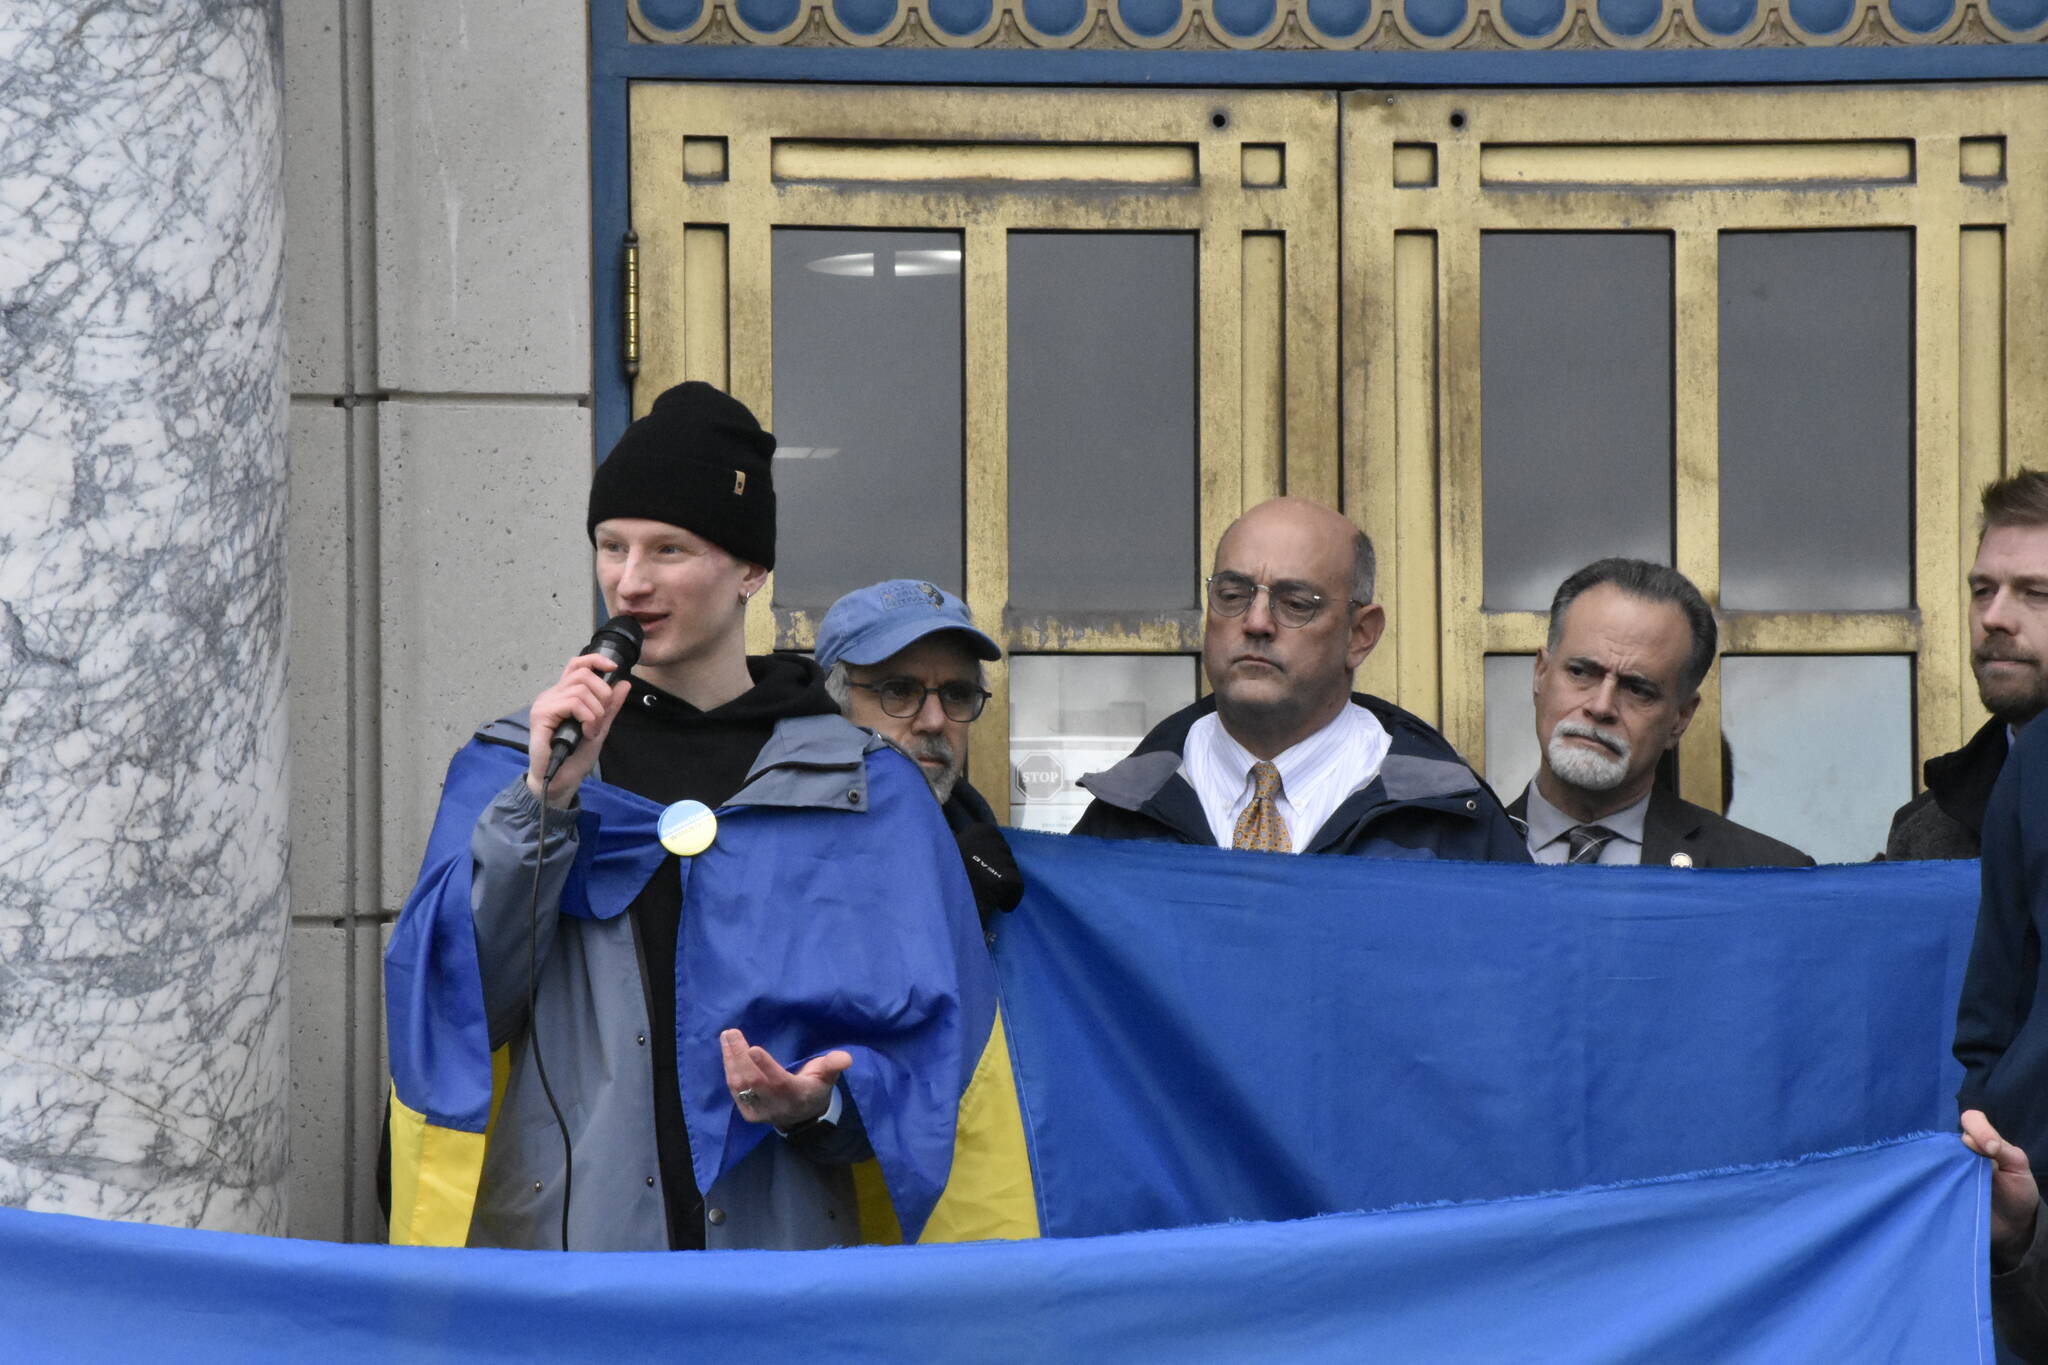 Peter Segall / Juneau Empire
Viktor Tkachenko, who recently moved to Alaska from Ukraine, speaks during a rally encouraging the state to divest from all Russian investment on March 4, 2022.